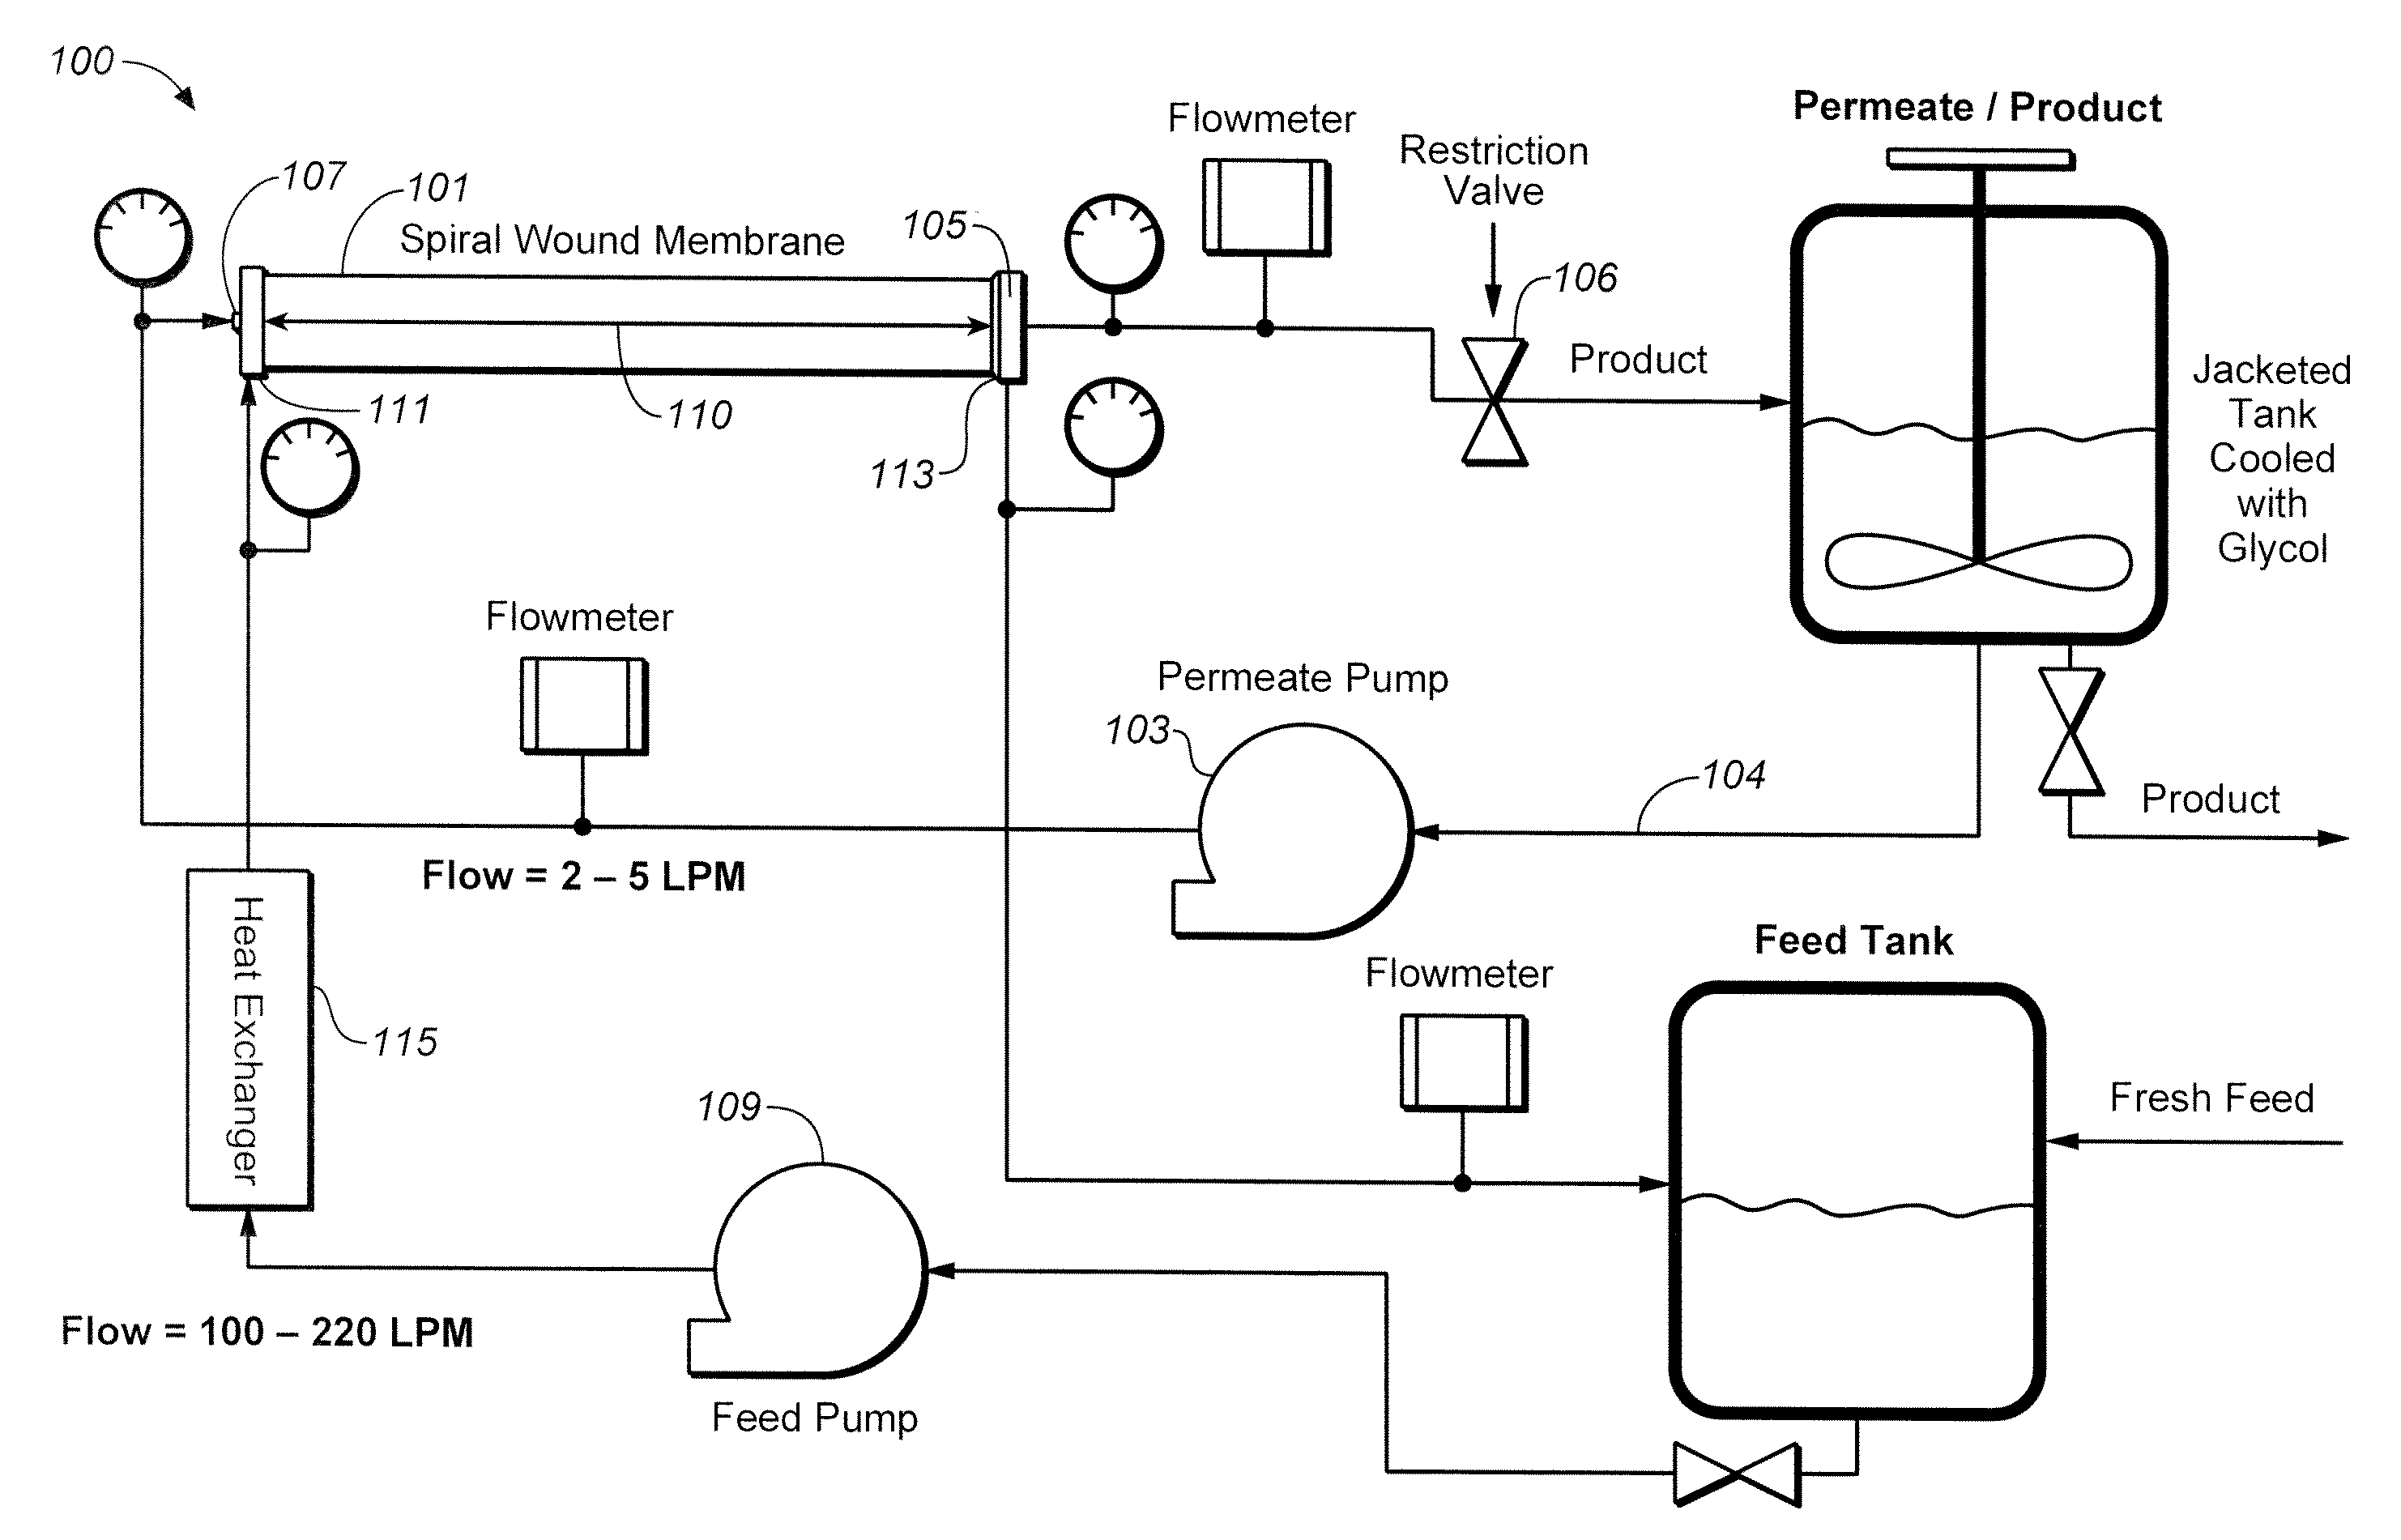 Filtration with internal fouling control